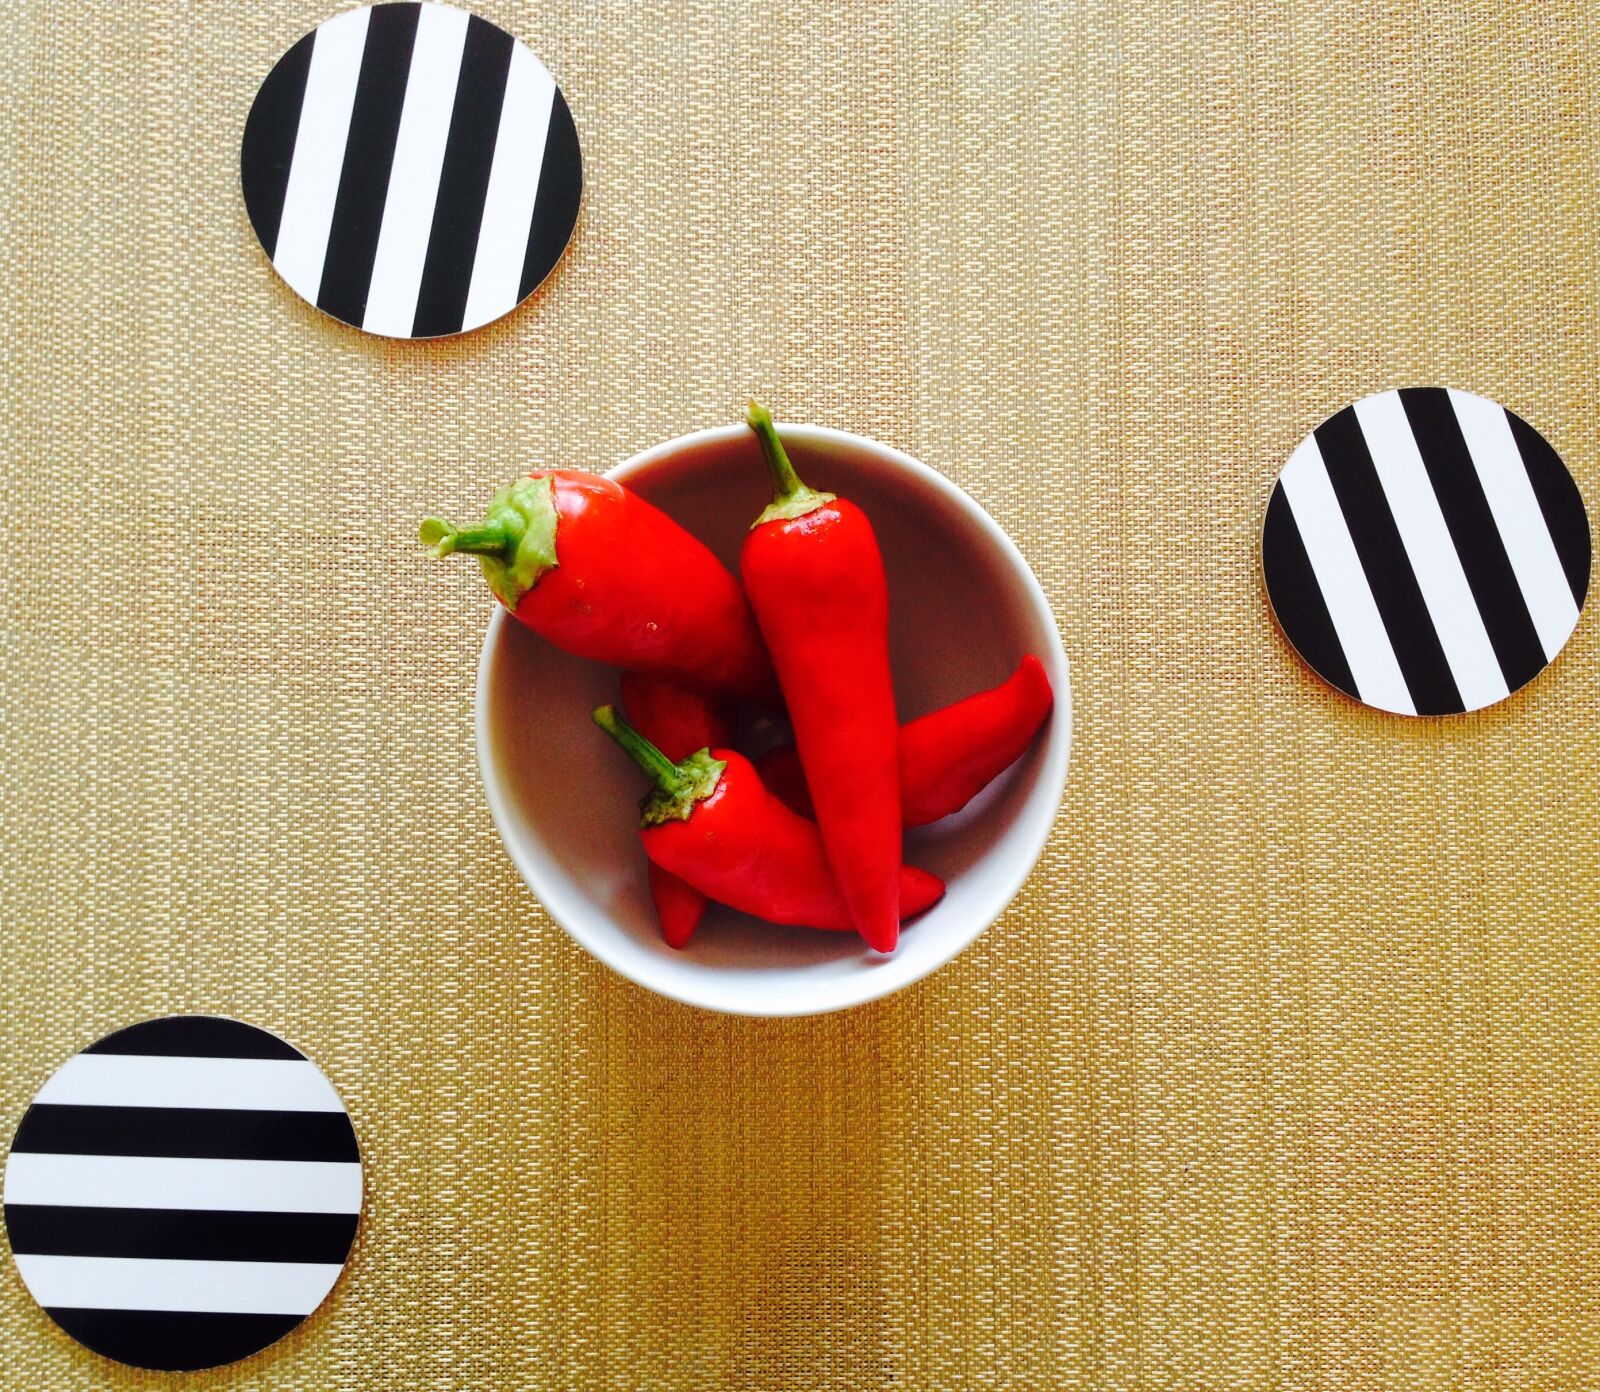 Apple iPhone 5 sample photo. Pepper, stripes, food photography